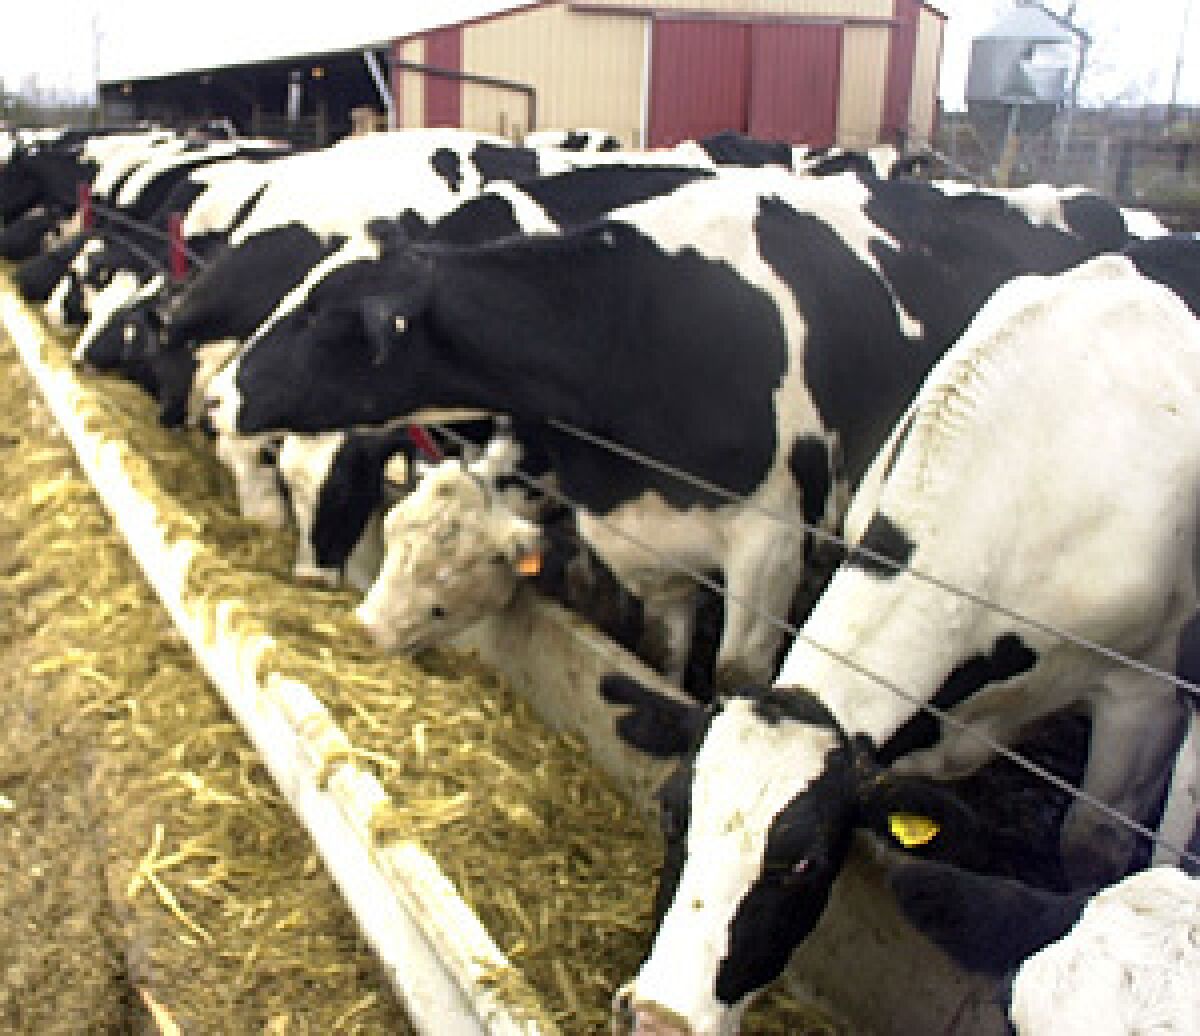 Exposure to high levels of manure dust is linked to decreased incidence of lung cancer among dairy farmers, Italian studies have found. The flip side: Respiratory problems are common.